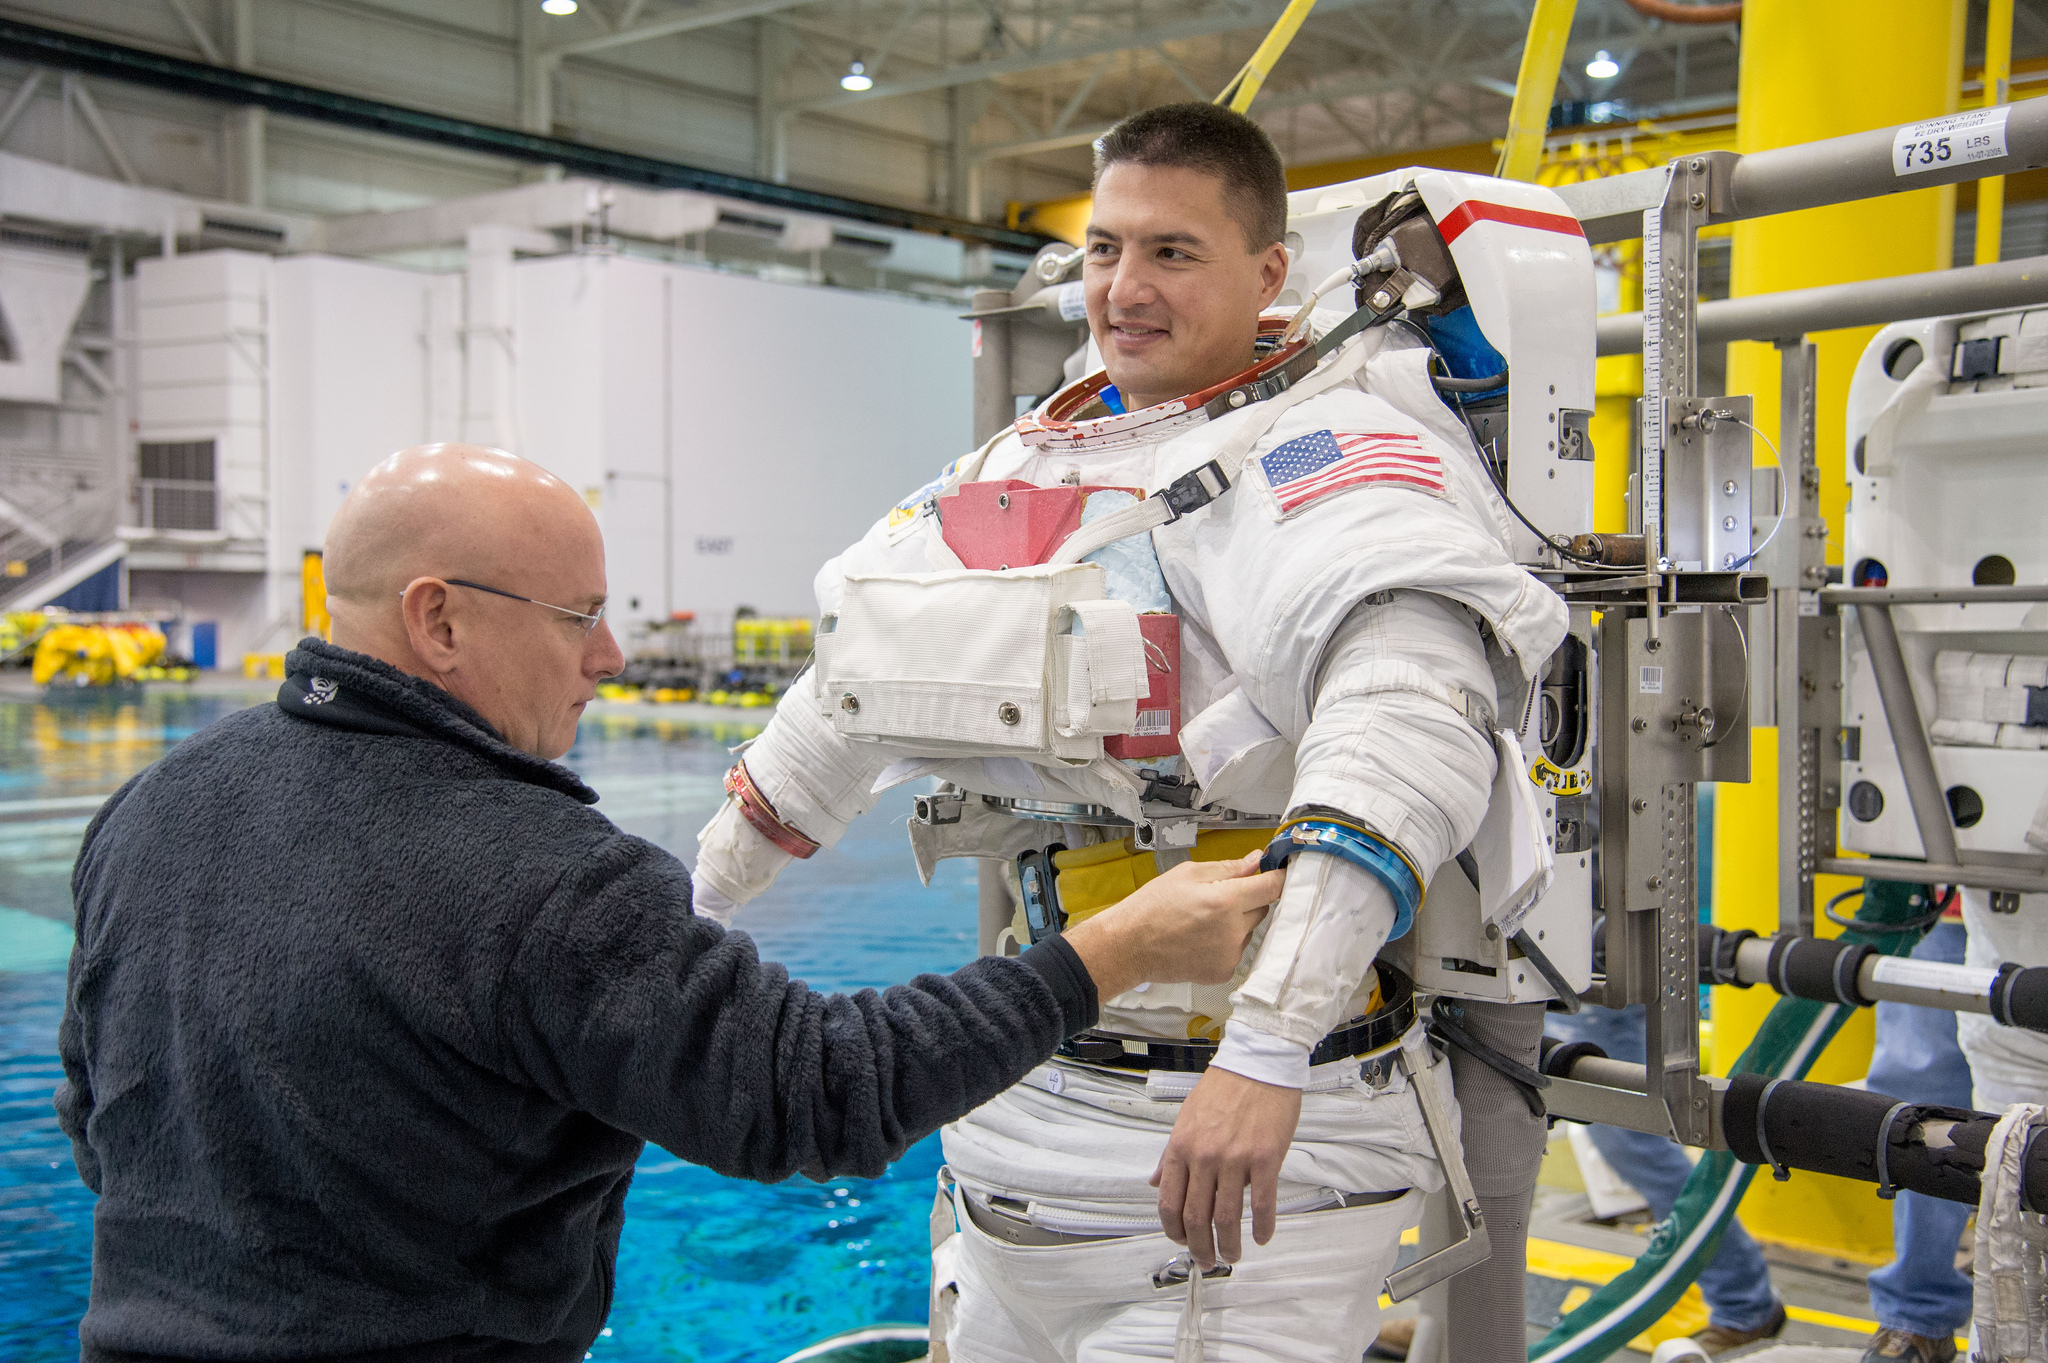 Preparing to make a house call: Scott Kelly, currently aboard the space station for a one-year stay, checks out spacewalk suit of space doc Kjell Lindgren, who blasts off next month (NASA)